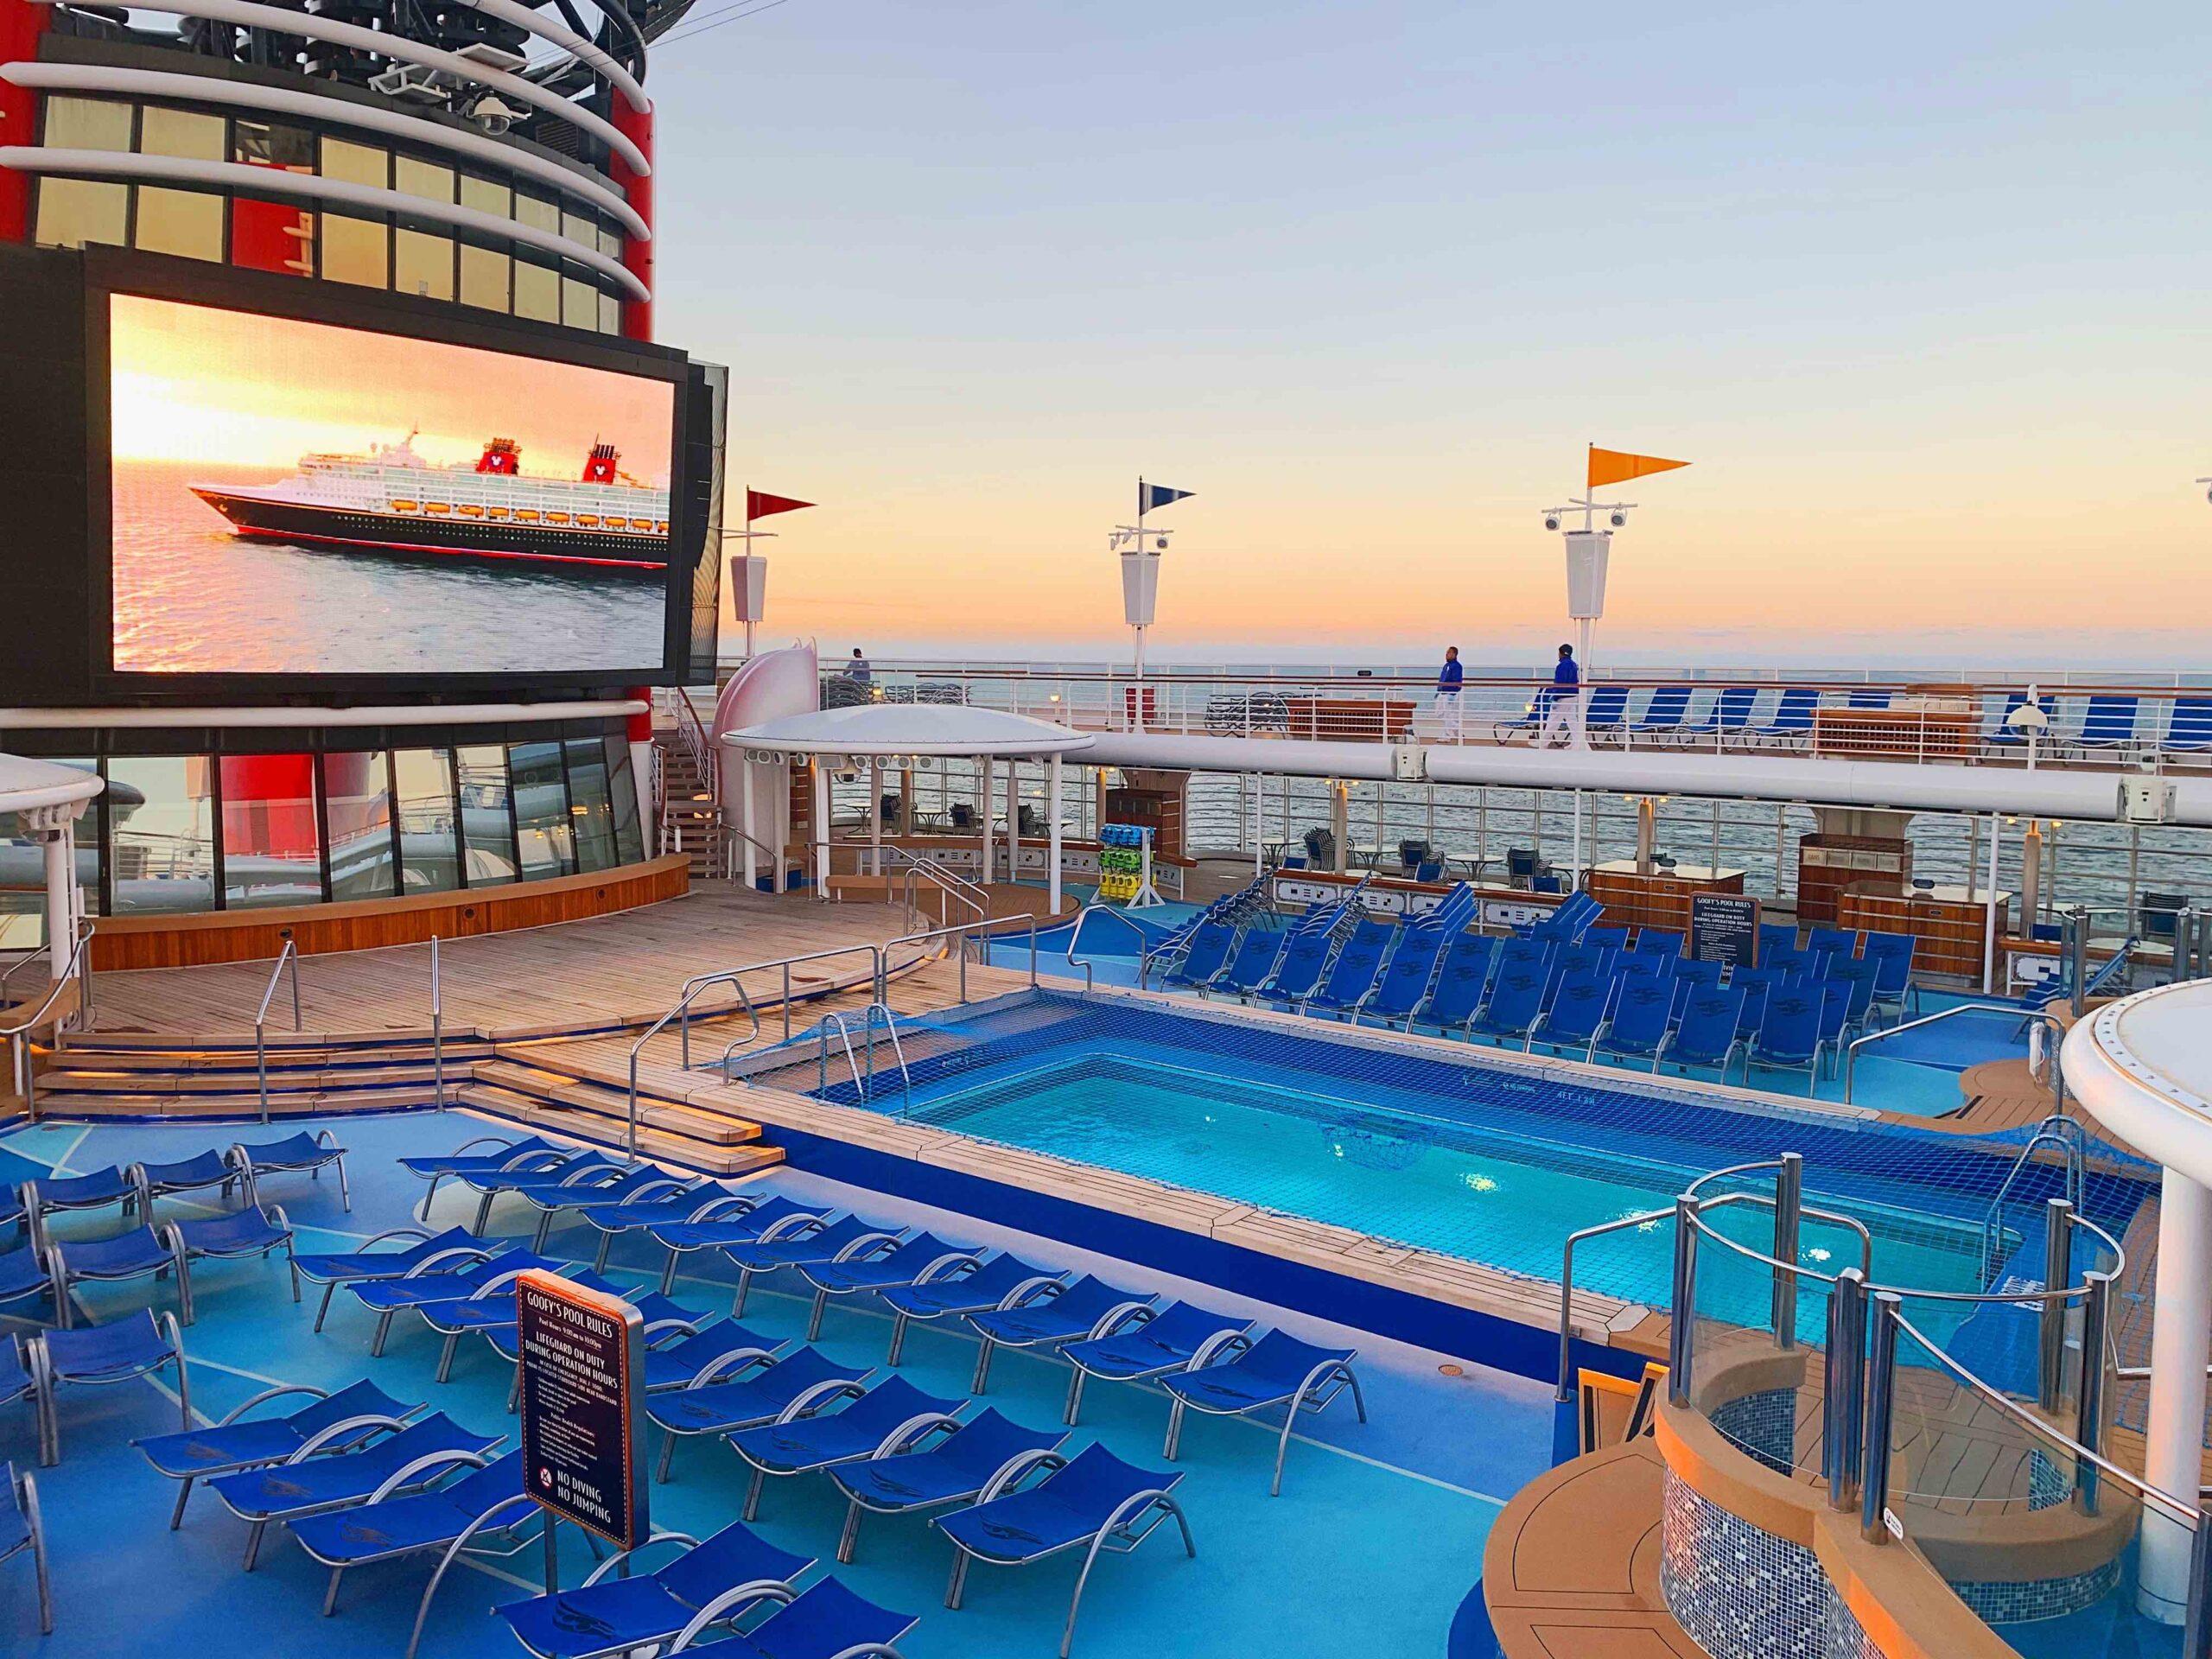 Prepare for Your Magical Cruise with this Disney Cruise Packing List